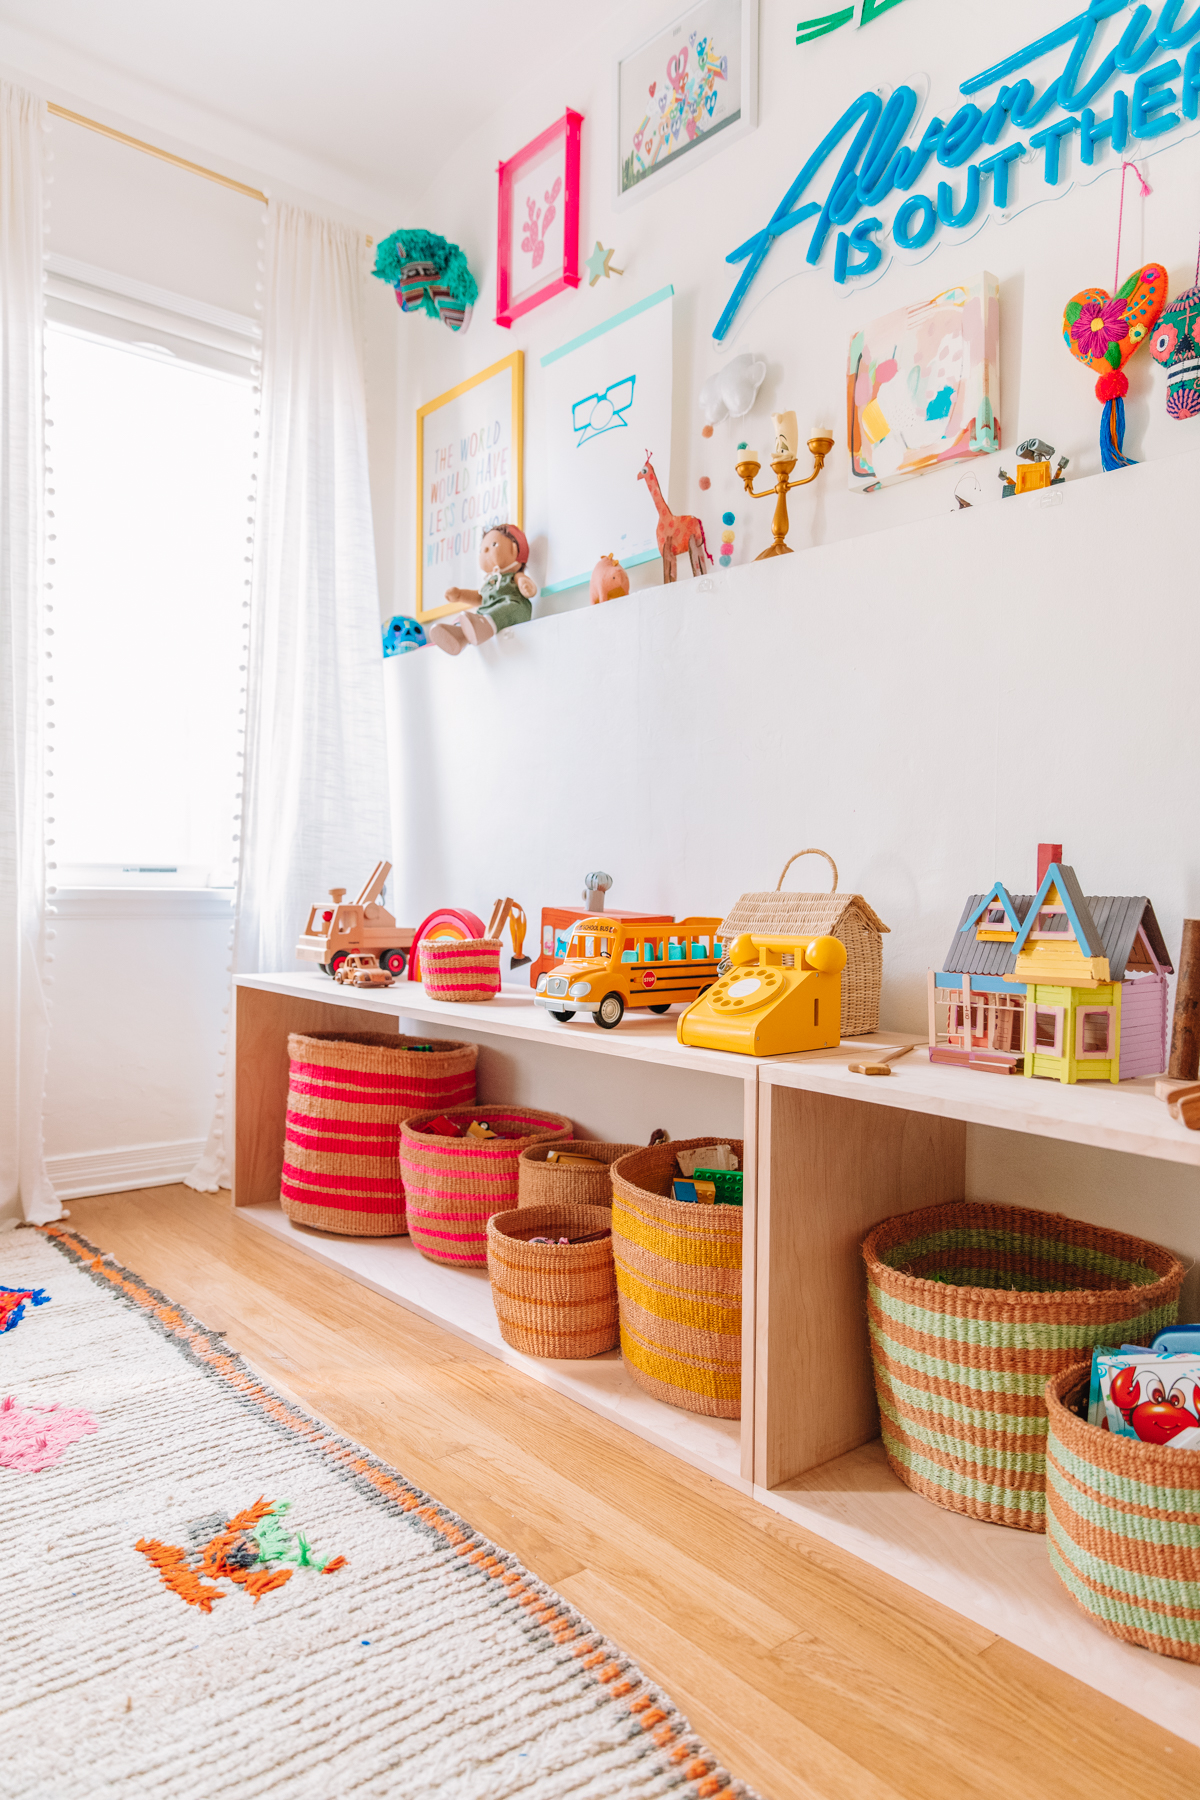 5 Simple Ideas for Storing Toys! - Design Improvised